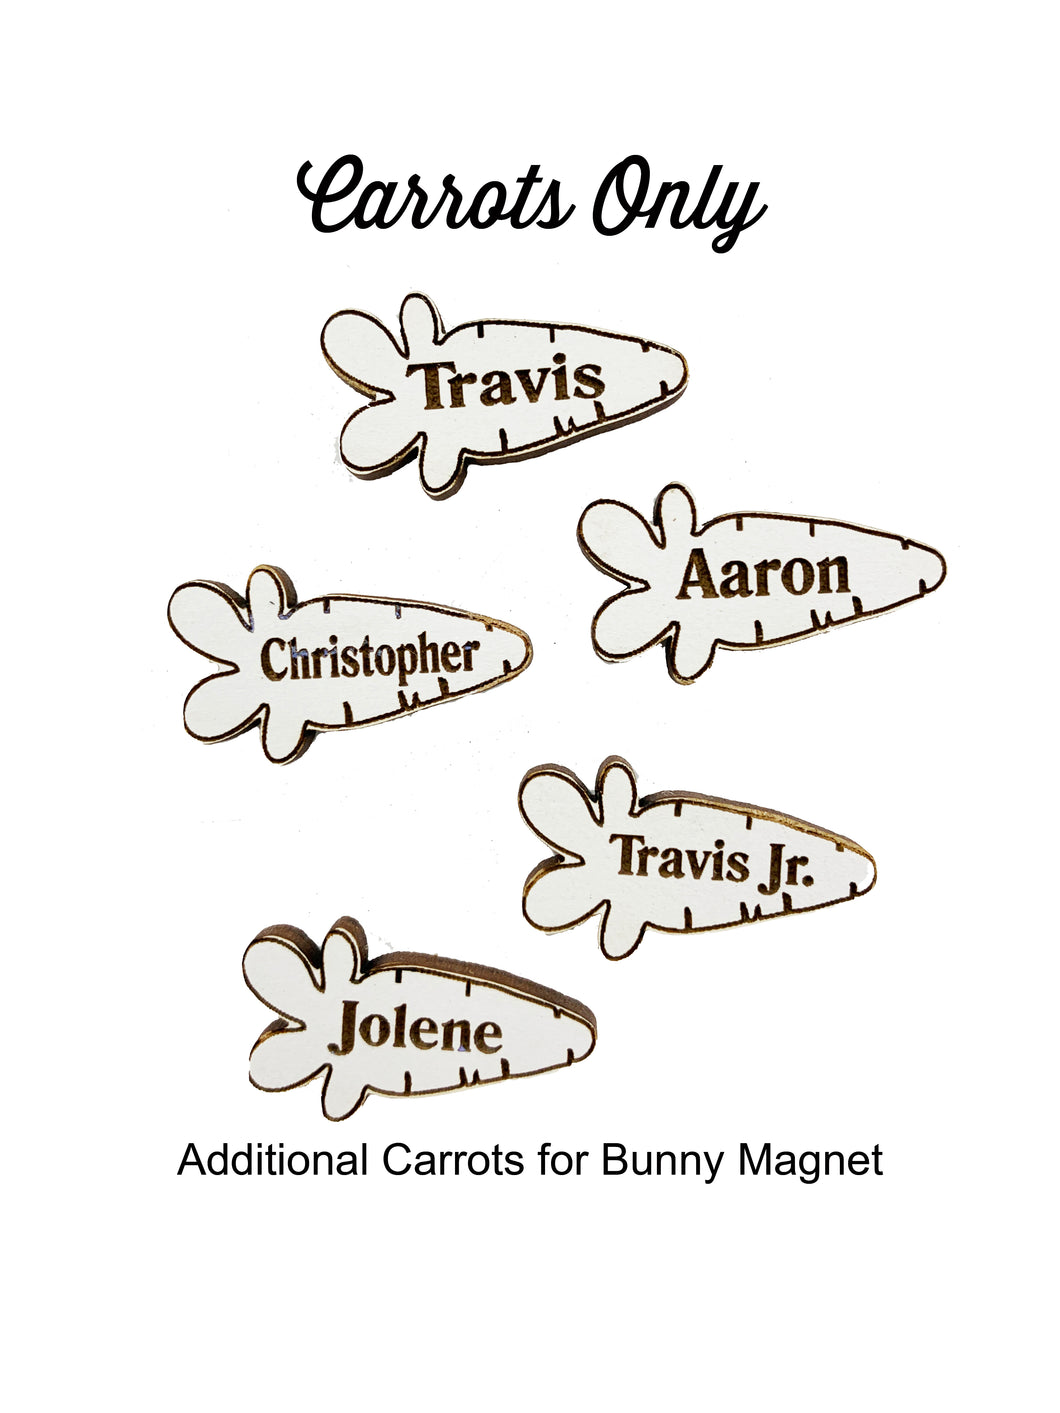 Additional Carrots: Reorder More Carrot Pieces for Bunny Magnet - Bunny Magnet Sold Separately - Add More Throughout the Years